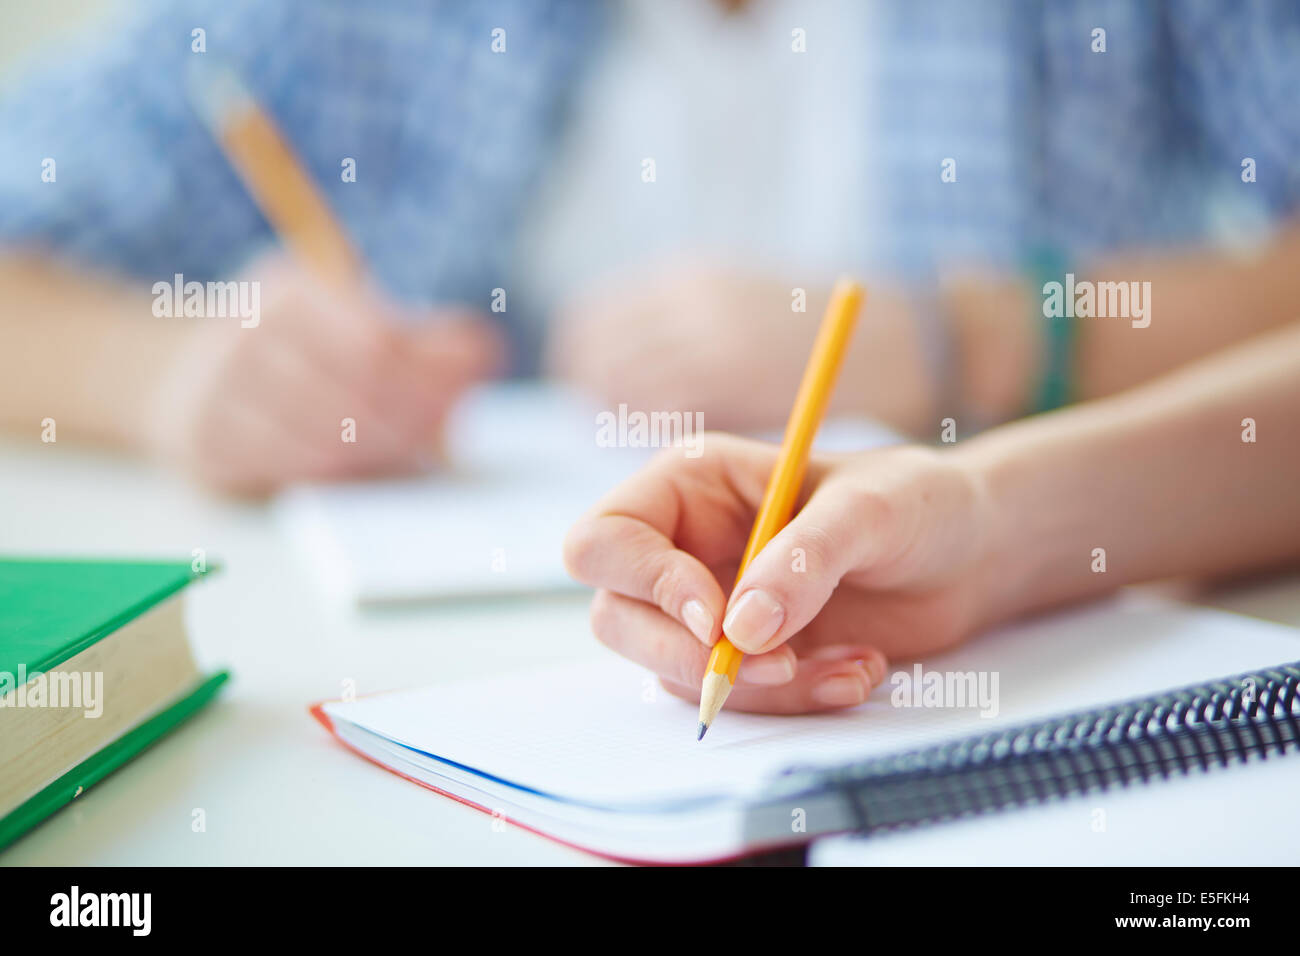 Hand of student with pencil carrying out written task or writing lecture Stock Photo